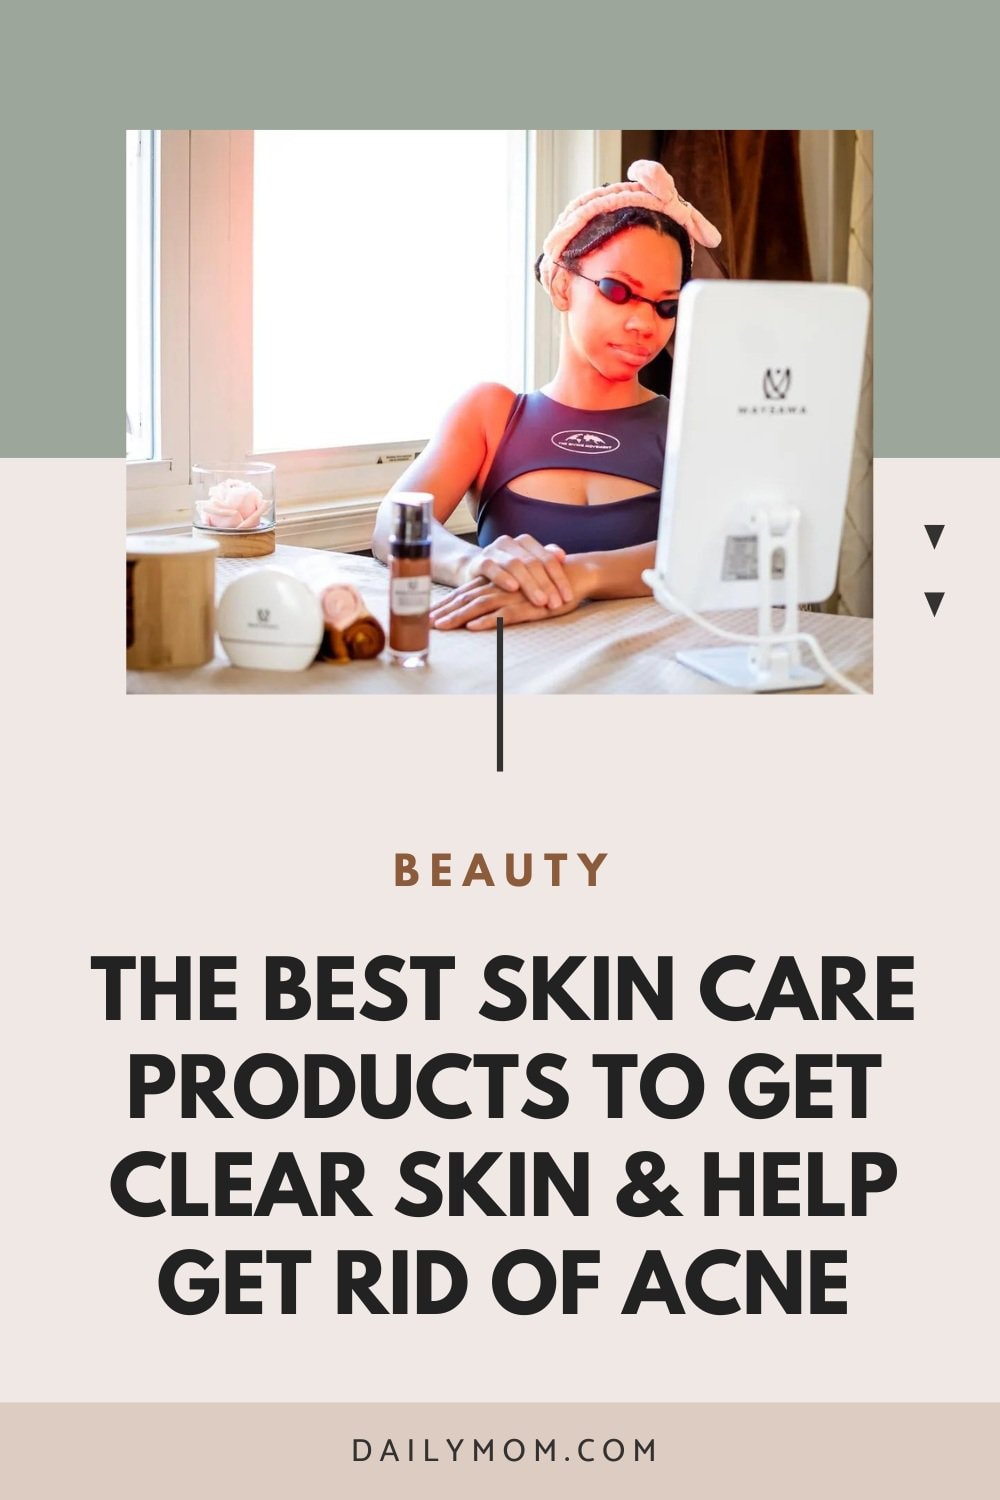 Daily Mom Parent Portal Products To Clear Skin
